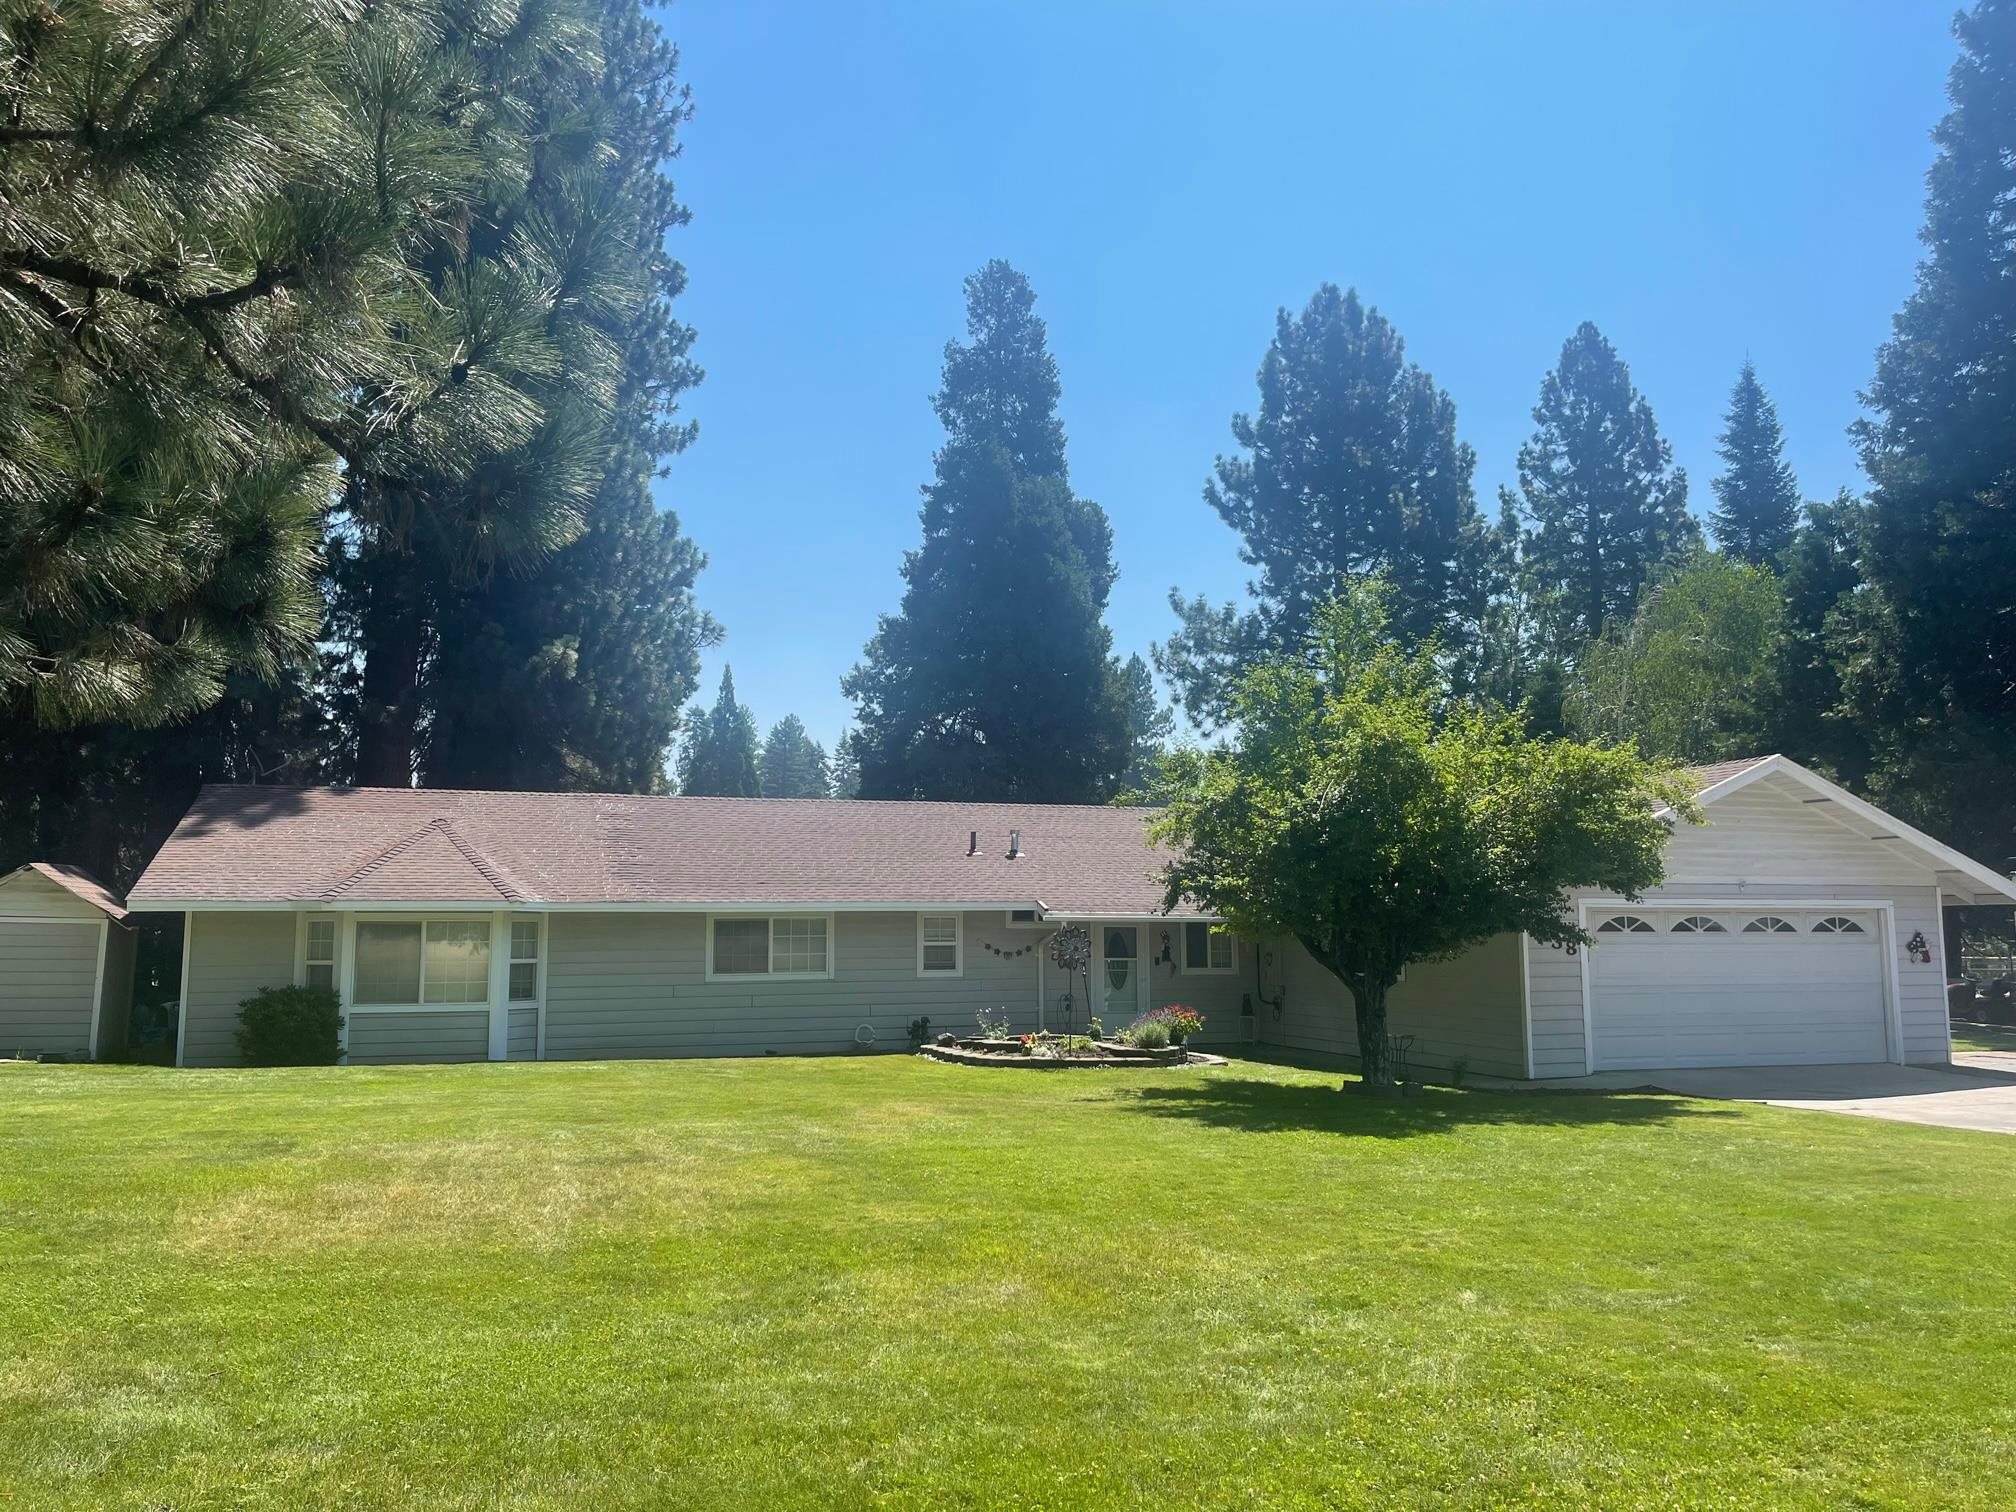 Spacious Country Home. This 2232sqft ranch style home is located in a great neighborhood within walking distance of all that downtown Mt Shasta has to offer. The large, open concept living area consists of the living room, a dining area and kitchen. The kitchen features granite counter tops, an eat at island, custom cabinets and recessed lighting. There is a wood stove, a Monitor heater and a newly installed Mini Split system to keep you warm in the winter and cool in the summer. With 4 bedrooms and 3 bathrooms there is plenty of room for the whole family. A 5th room is currently being used as a game room- this flexible space can be used as a family room, den/office, or bedroom dependent on your needs. The 1-acre parcel is lovingly landscaped. There is a gorgeous lawn with auto sprinklers, flower beds, evergreens, deciduous trees, perennials, and a greenhouse. The large back patio gives you plenty of outdoor livings space. The attached 2-car garage has lots of built in storage and a separate utility/laundry room. New roof in 2023. There is also a bonus workshop/detached 1-car garage. Call to schedule your private showing today!